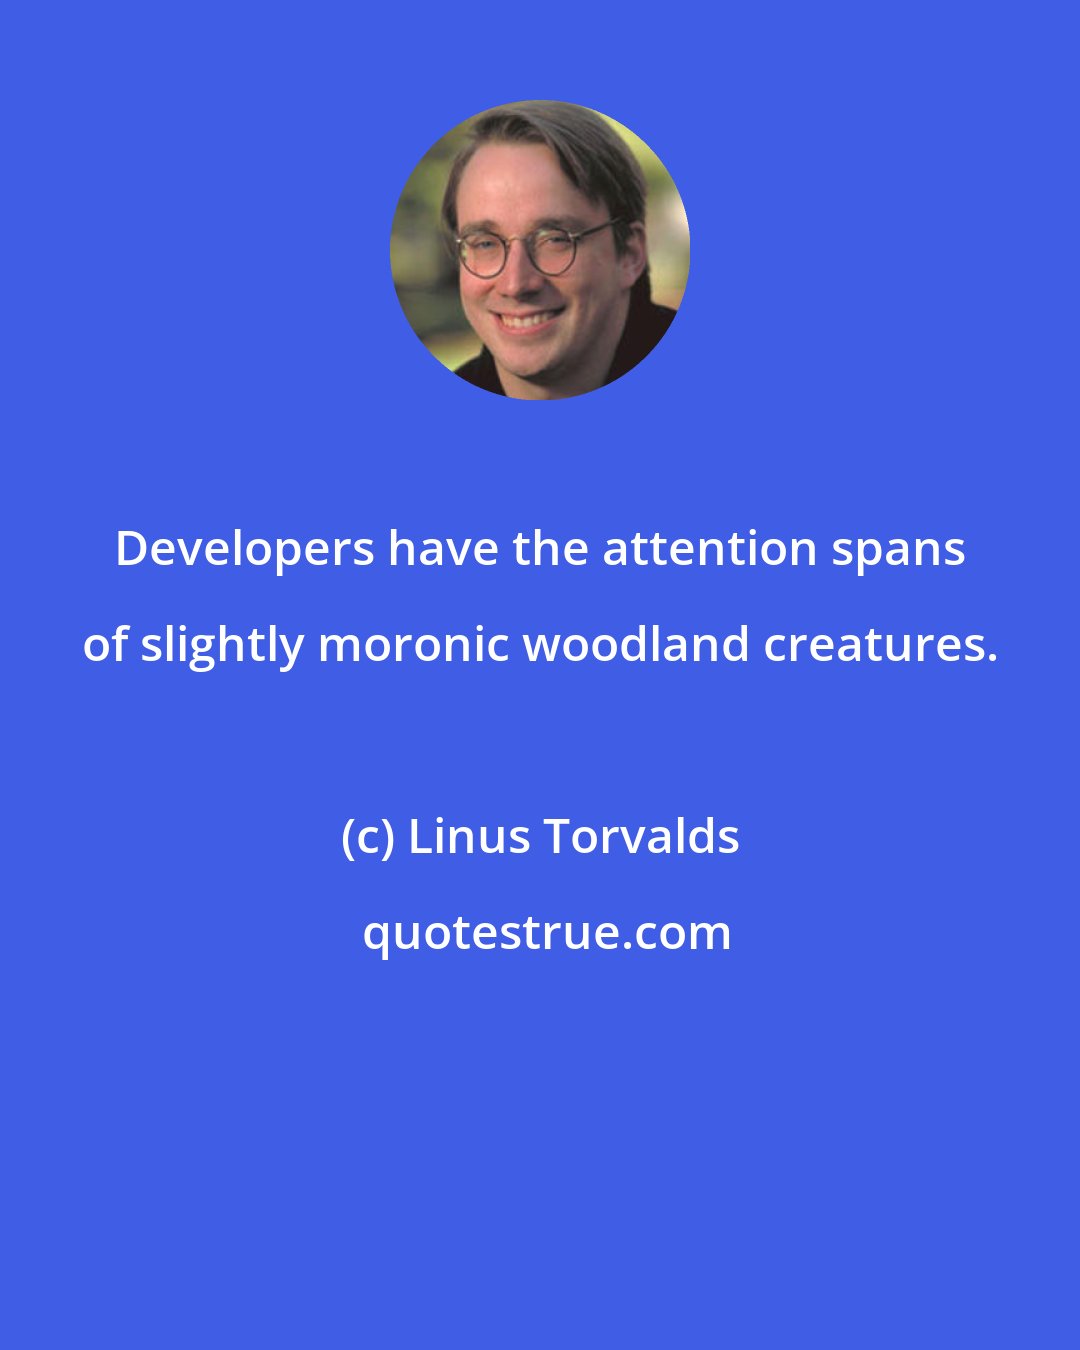 Linus Torvalds: Developers have the attention spans of slightly moronic woodland creatures.